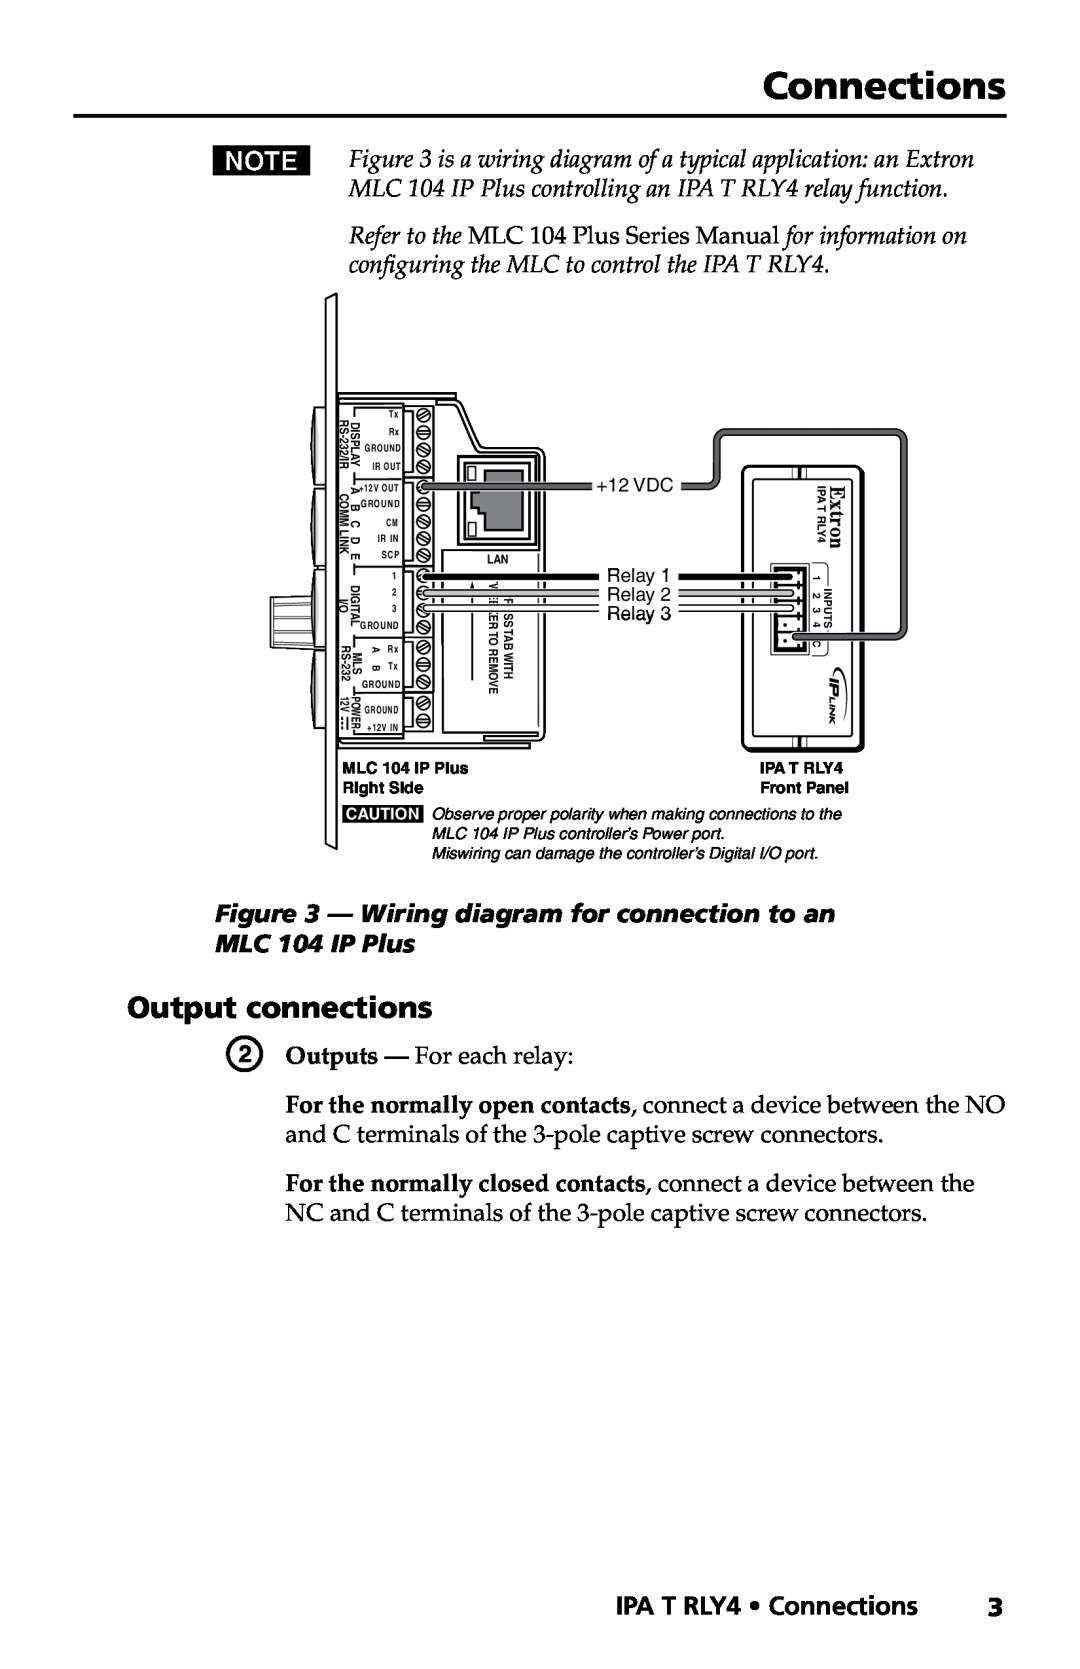 Extron electronic IPA T RLY4 manual Connections, Output connections, Wiring diagram for connection to an MLC 104 IP Plus 